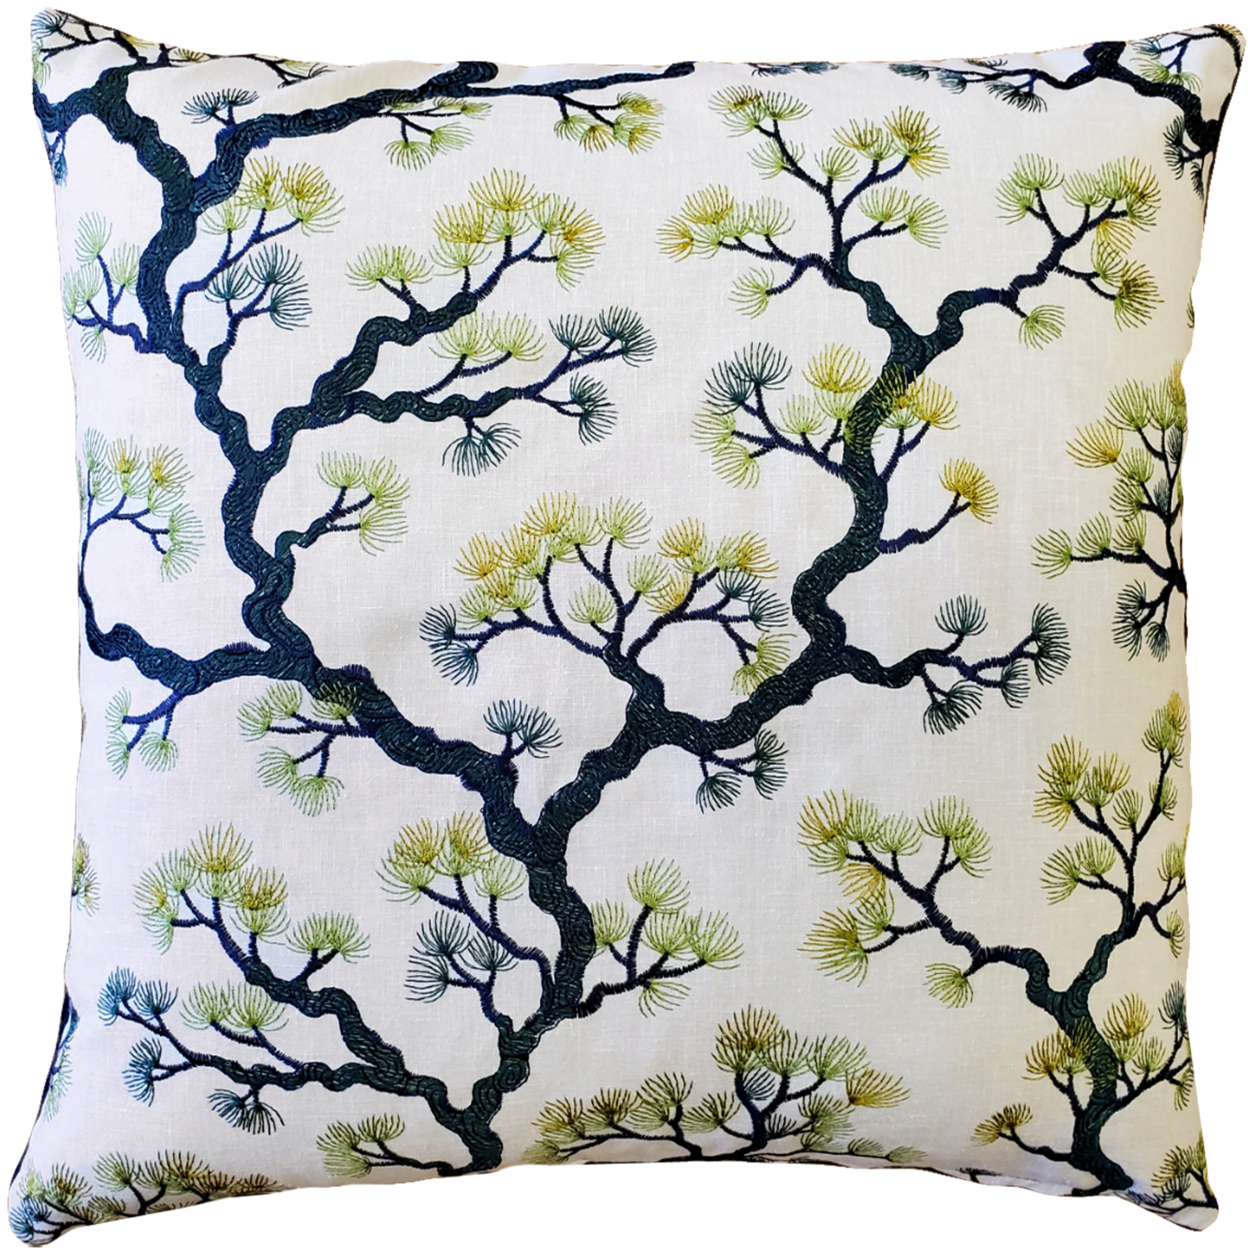 Bonsai Pine Teal Green Throw Pillow 19x19 Inches Square, Complete Pillow with Polyfill Pillow Insert